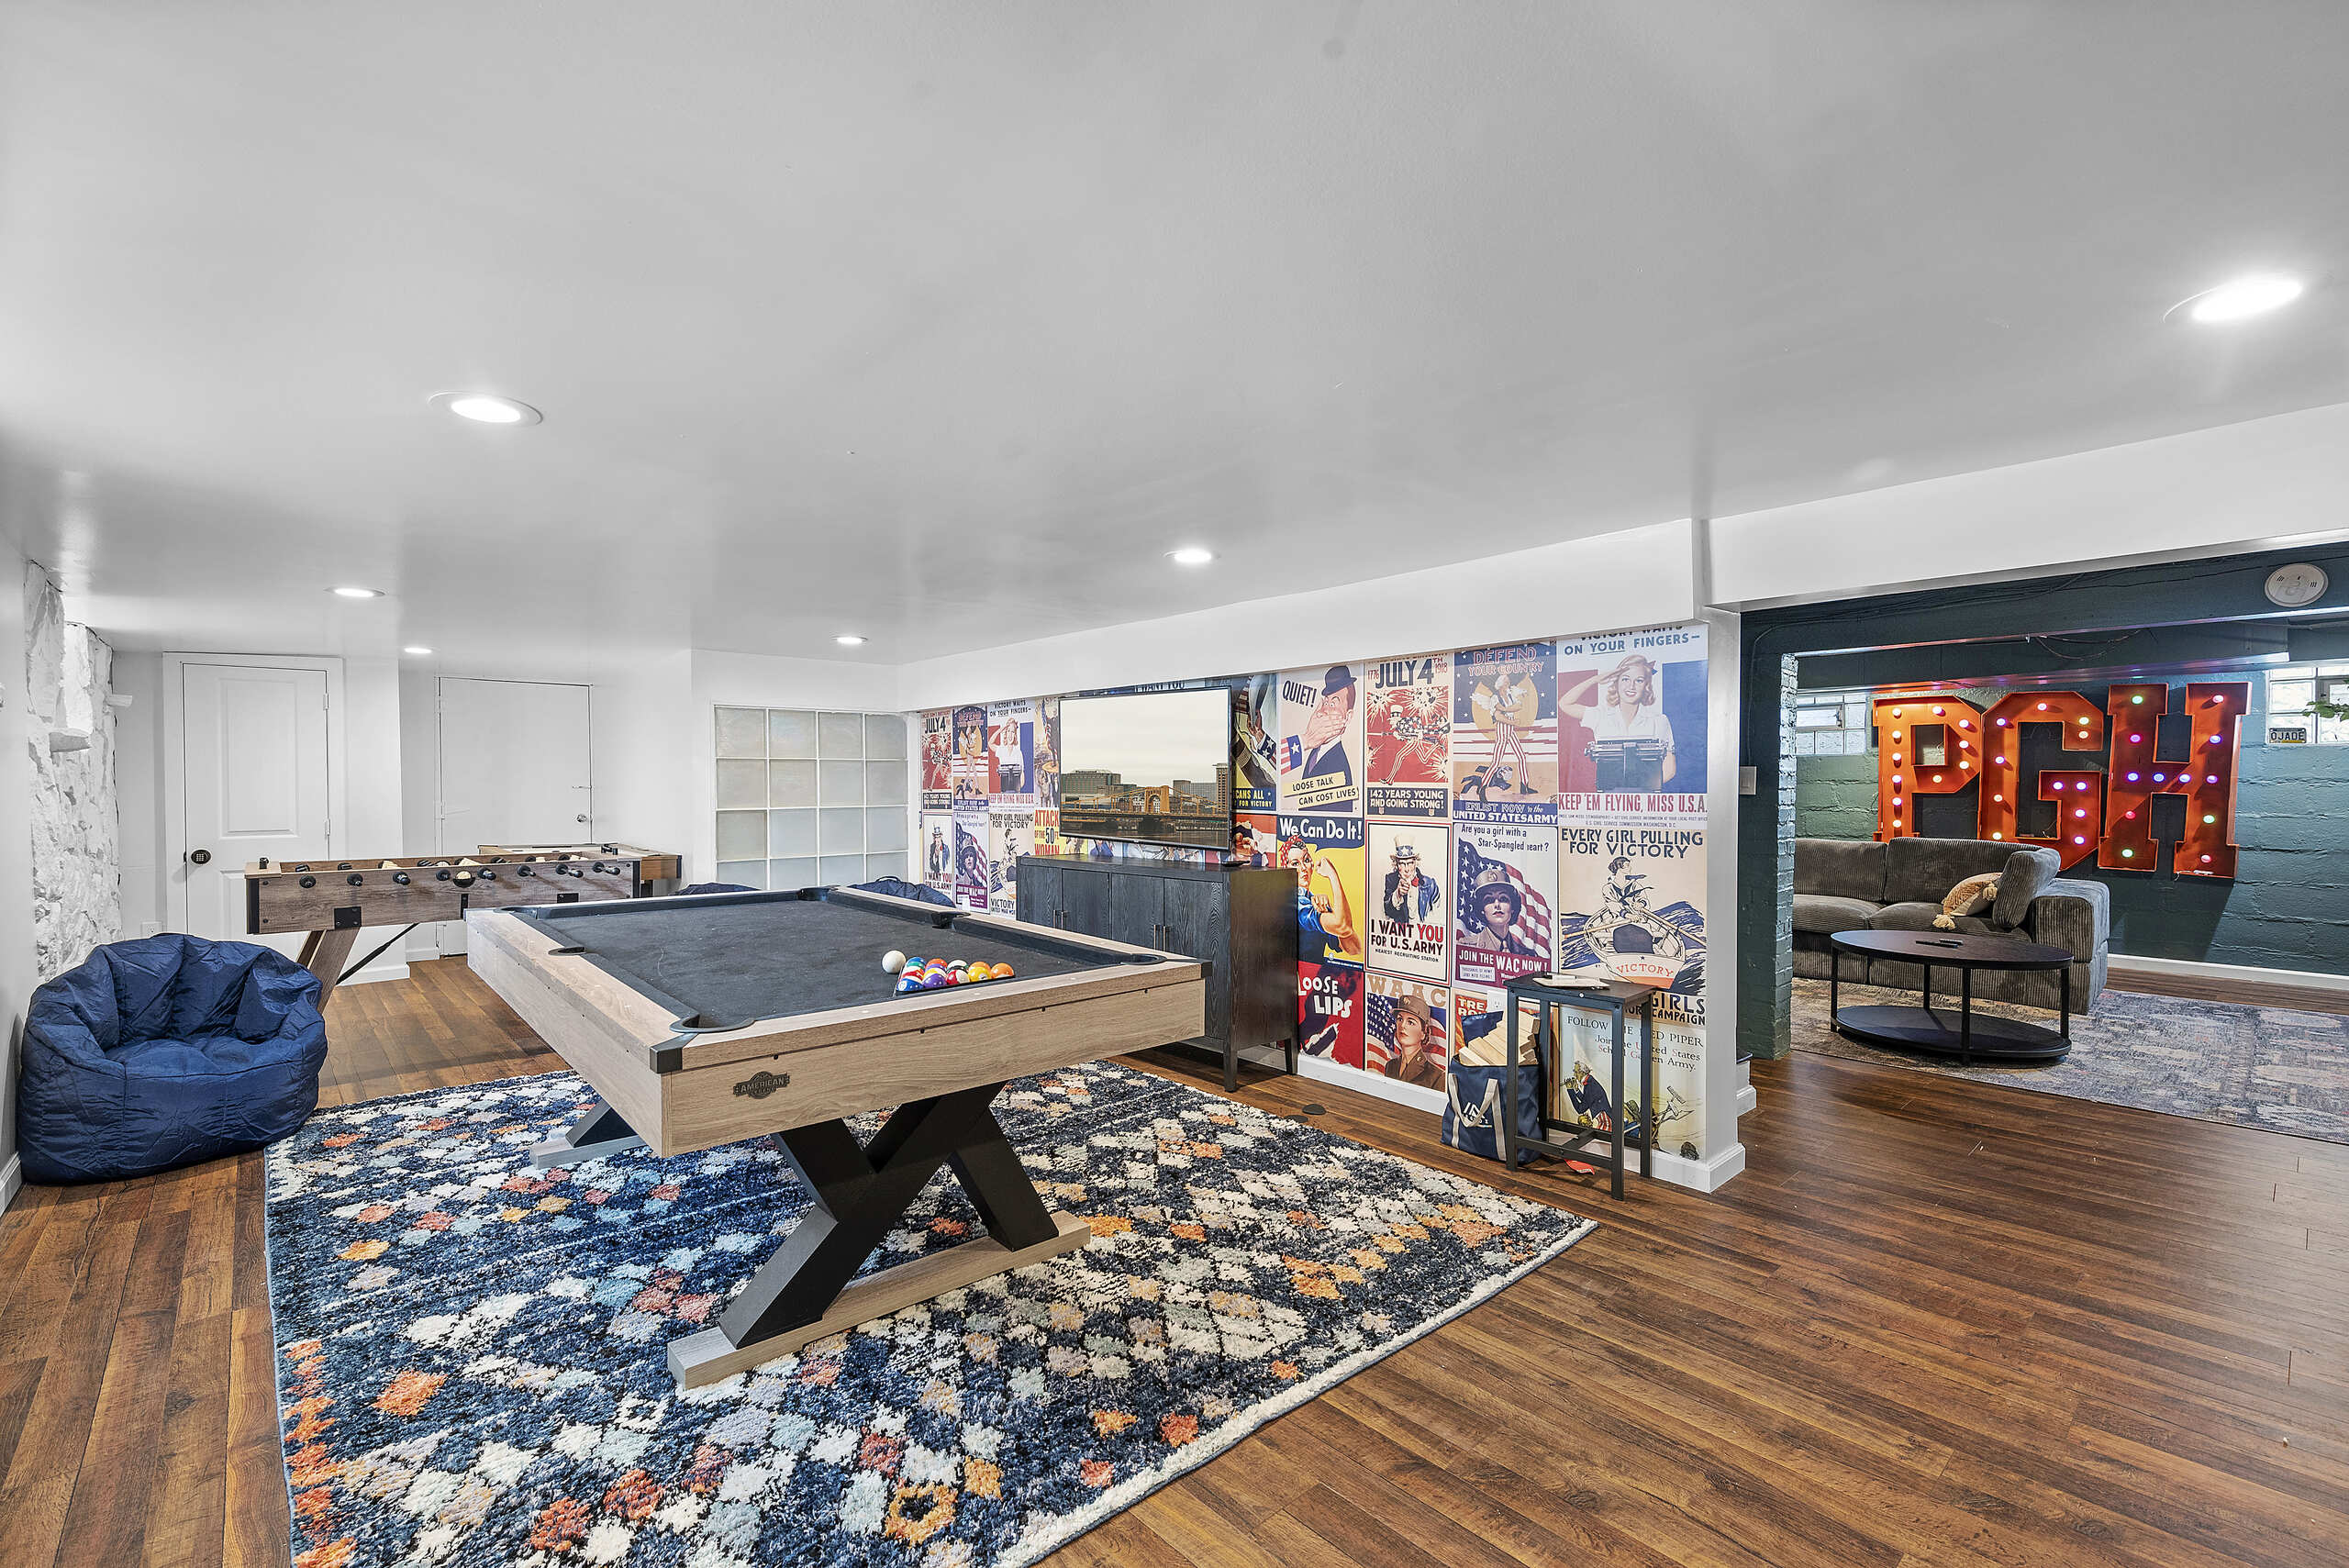 After renovation, a vibrant recreational room in a vacation rental featuring a pool table, modern decor, and lively wall art.